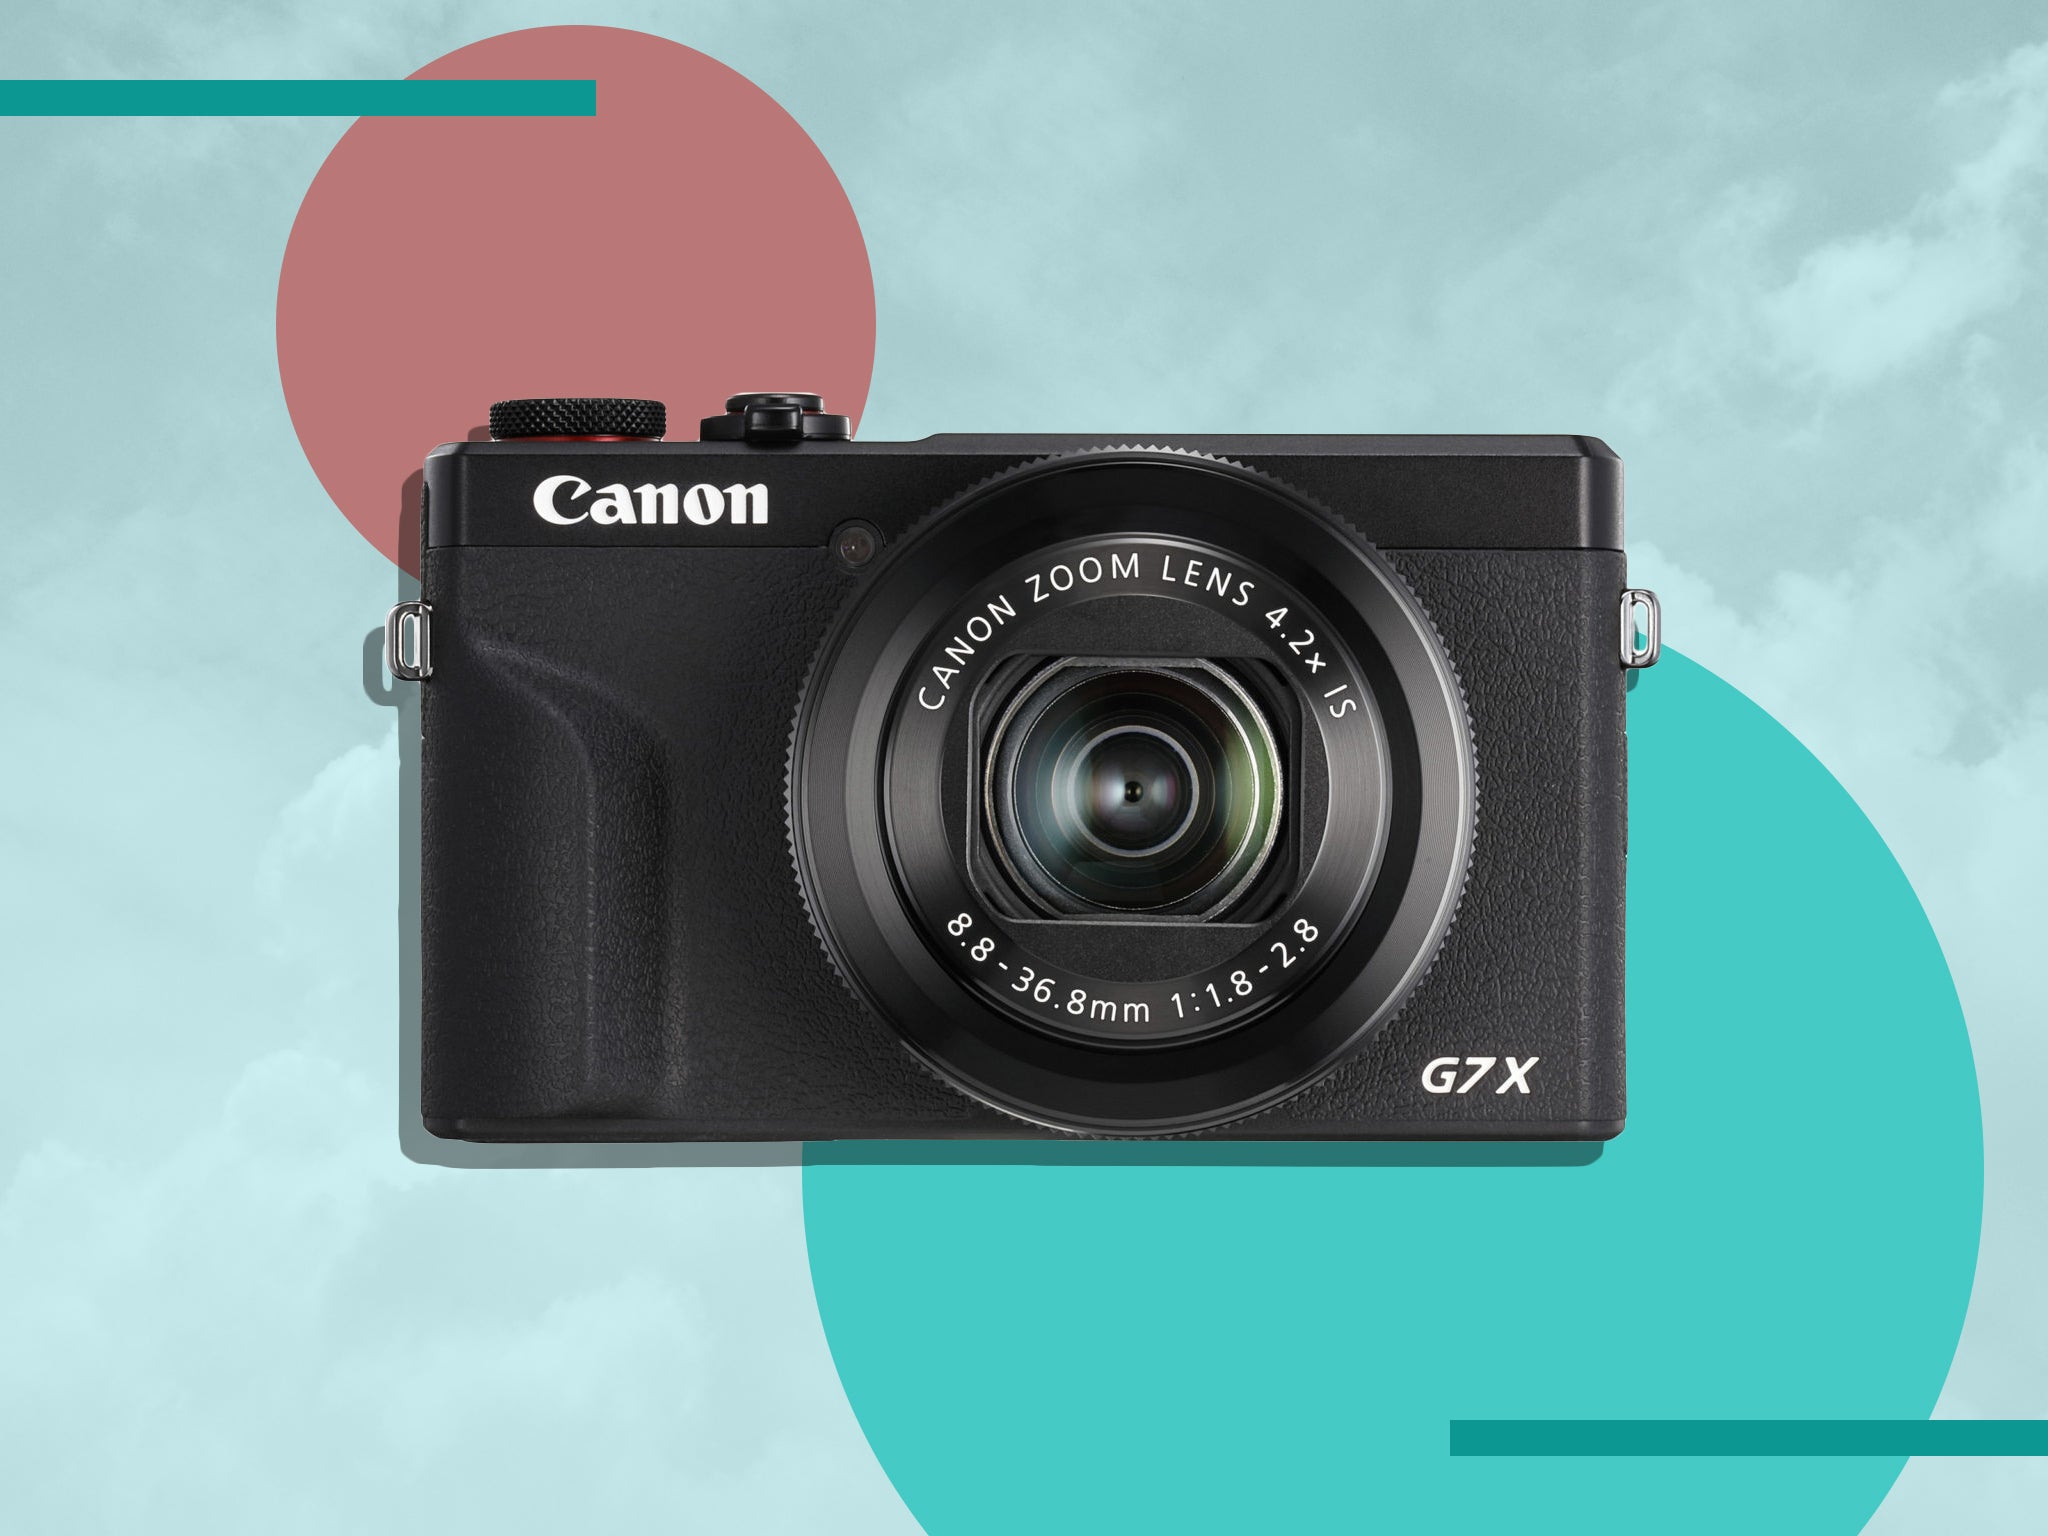 Canon powershot G7 X Mark III review: A lightweight camera for